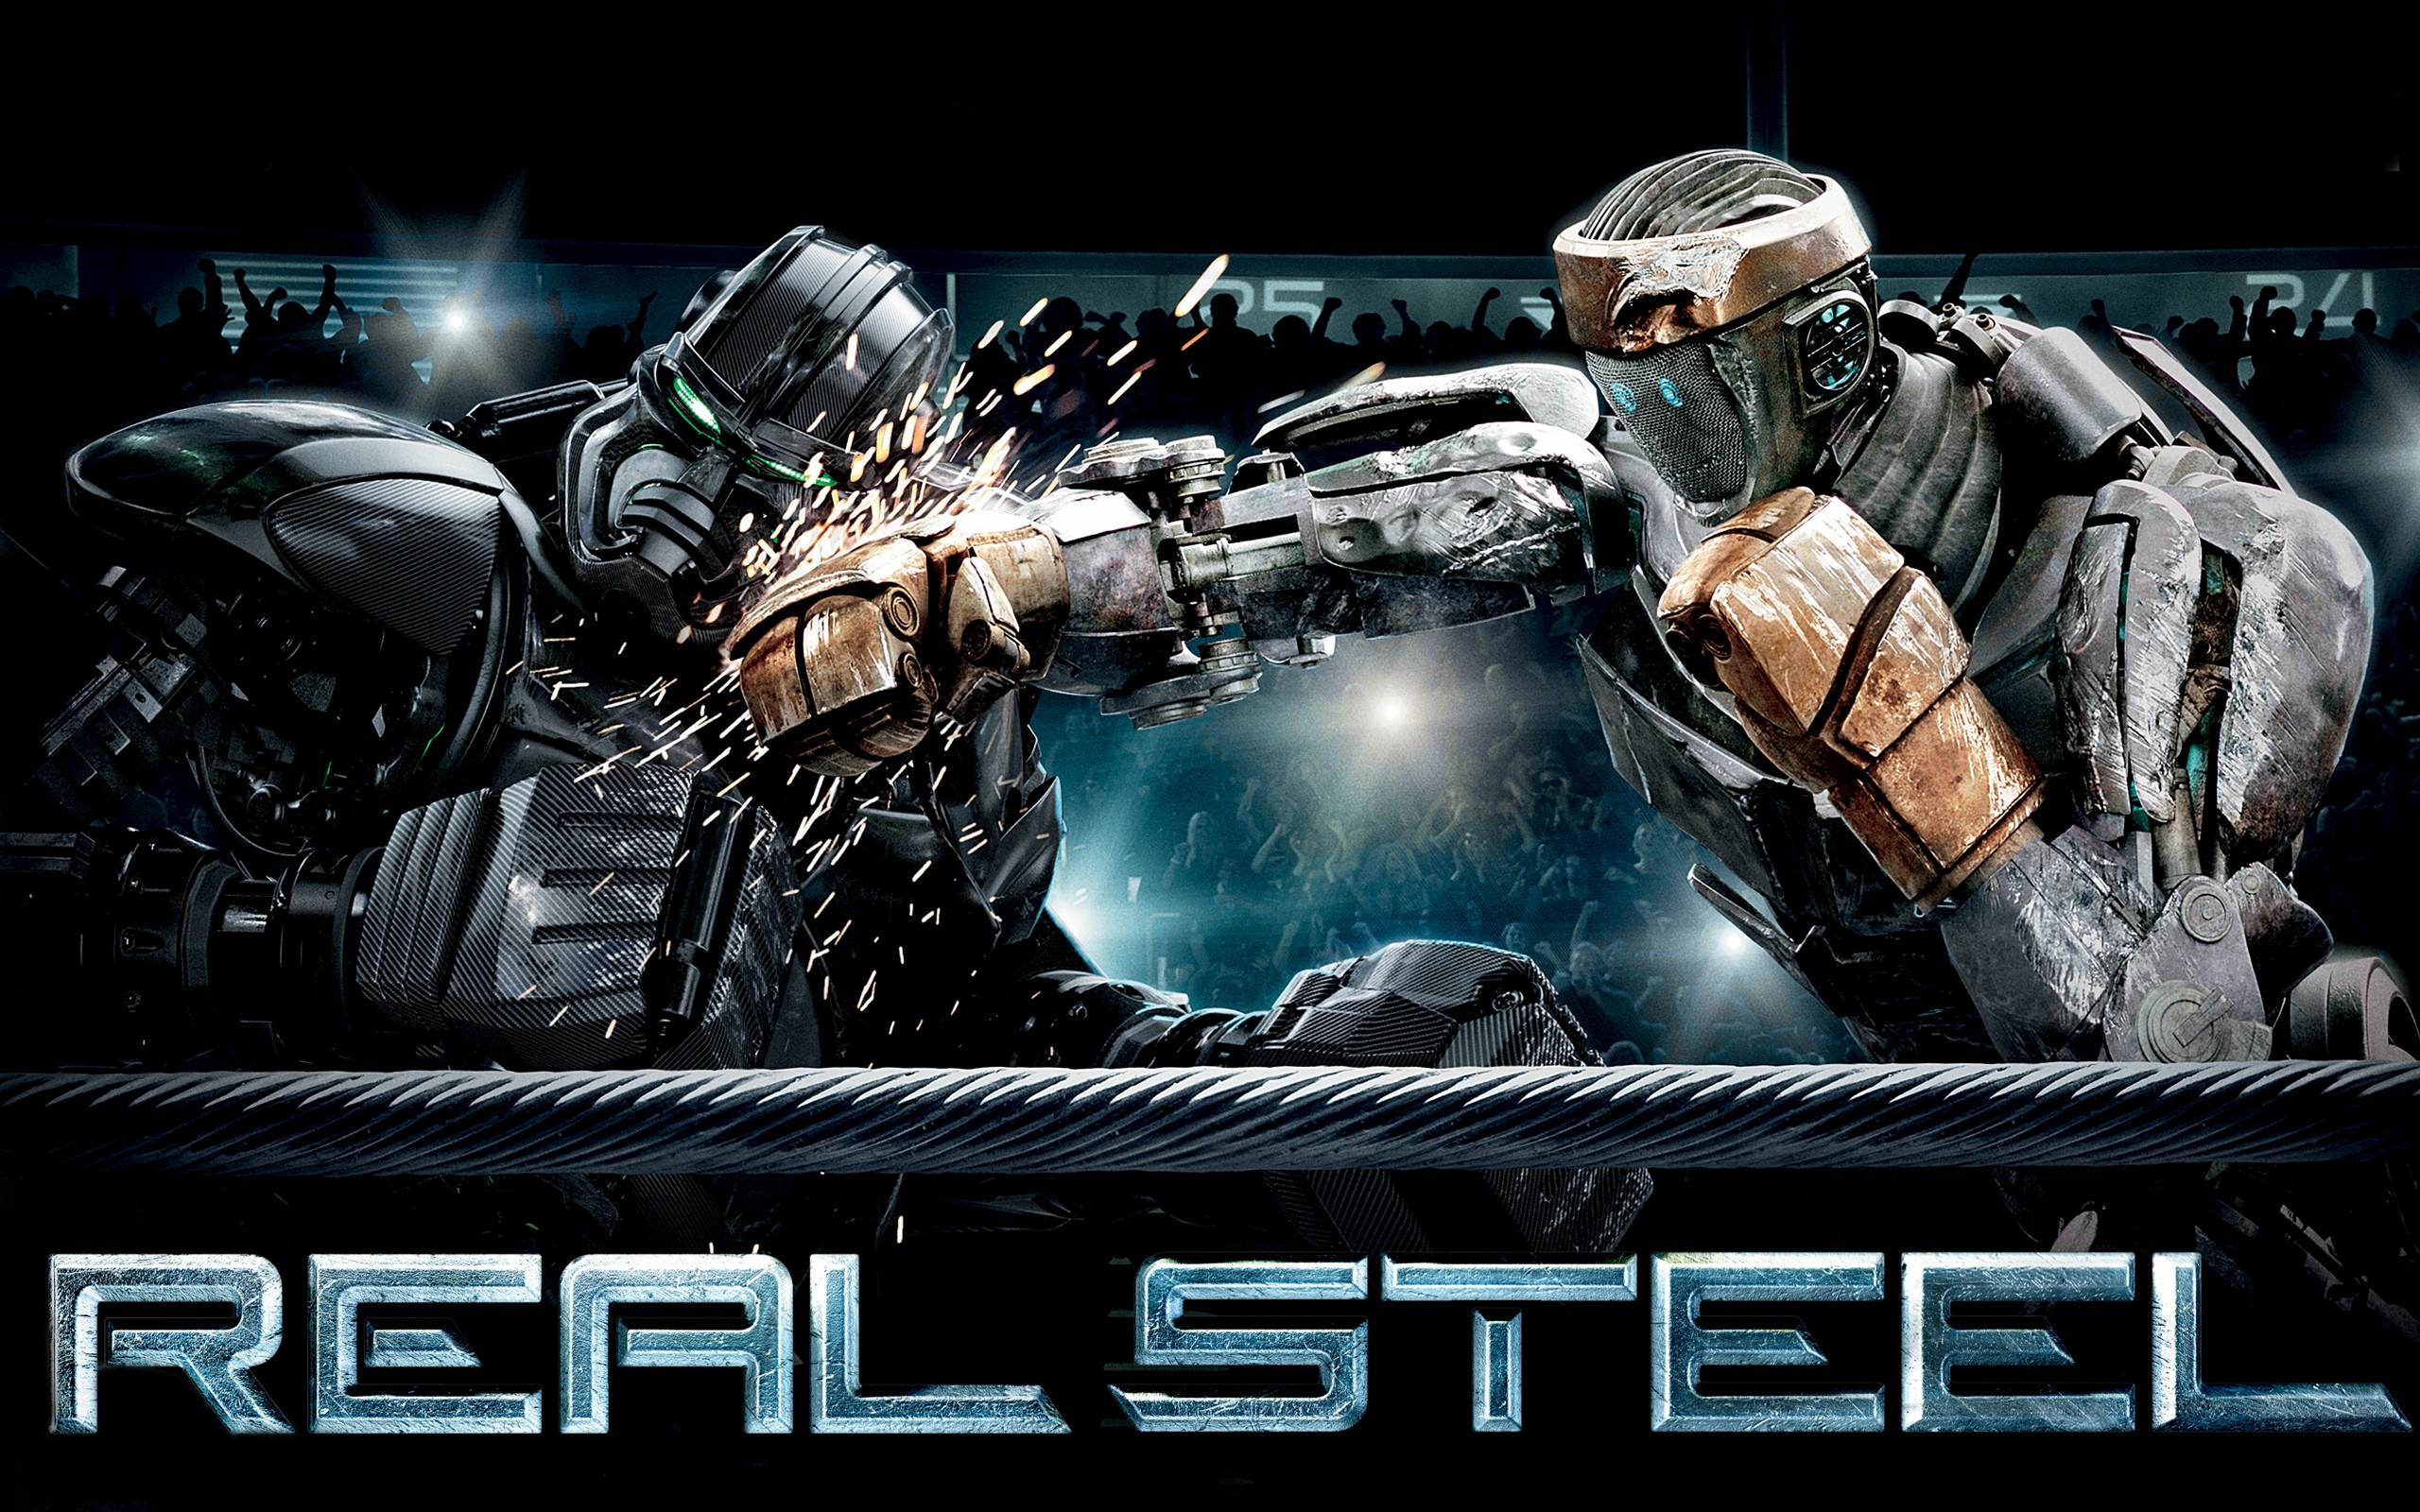 real steel wallpaper hd,action adventure game,shooter game,pc game,games,movie